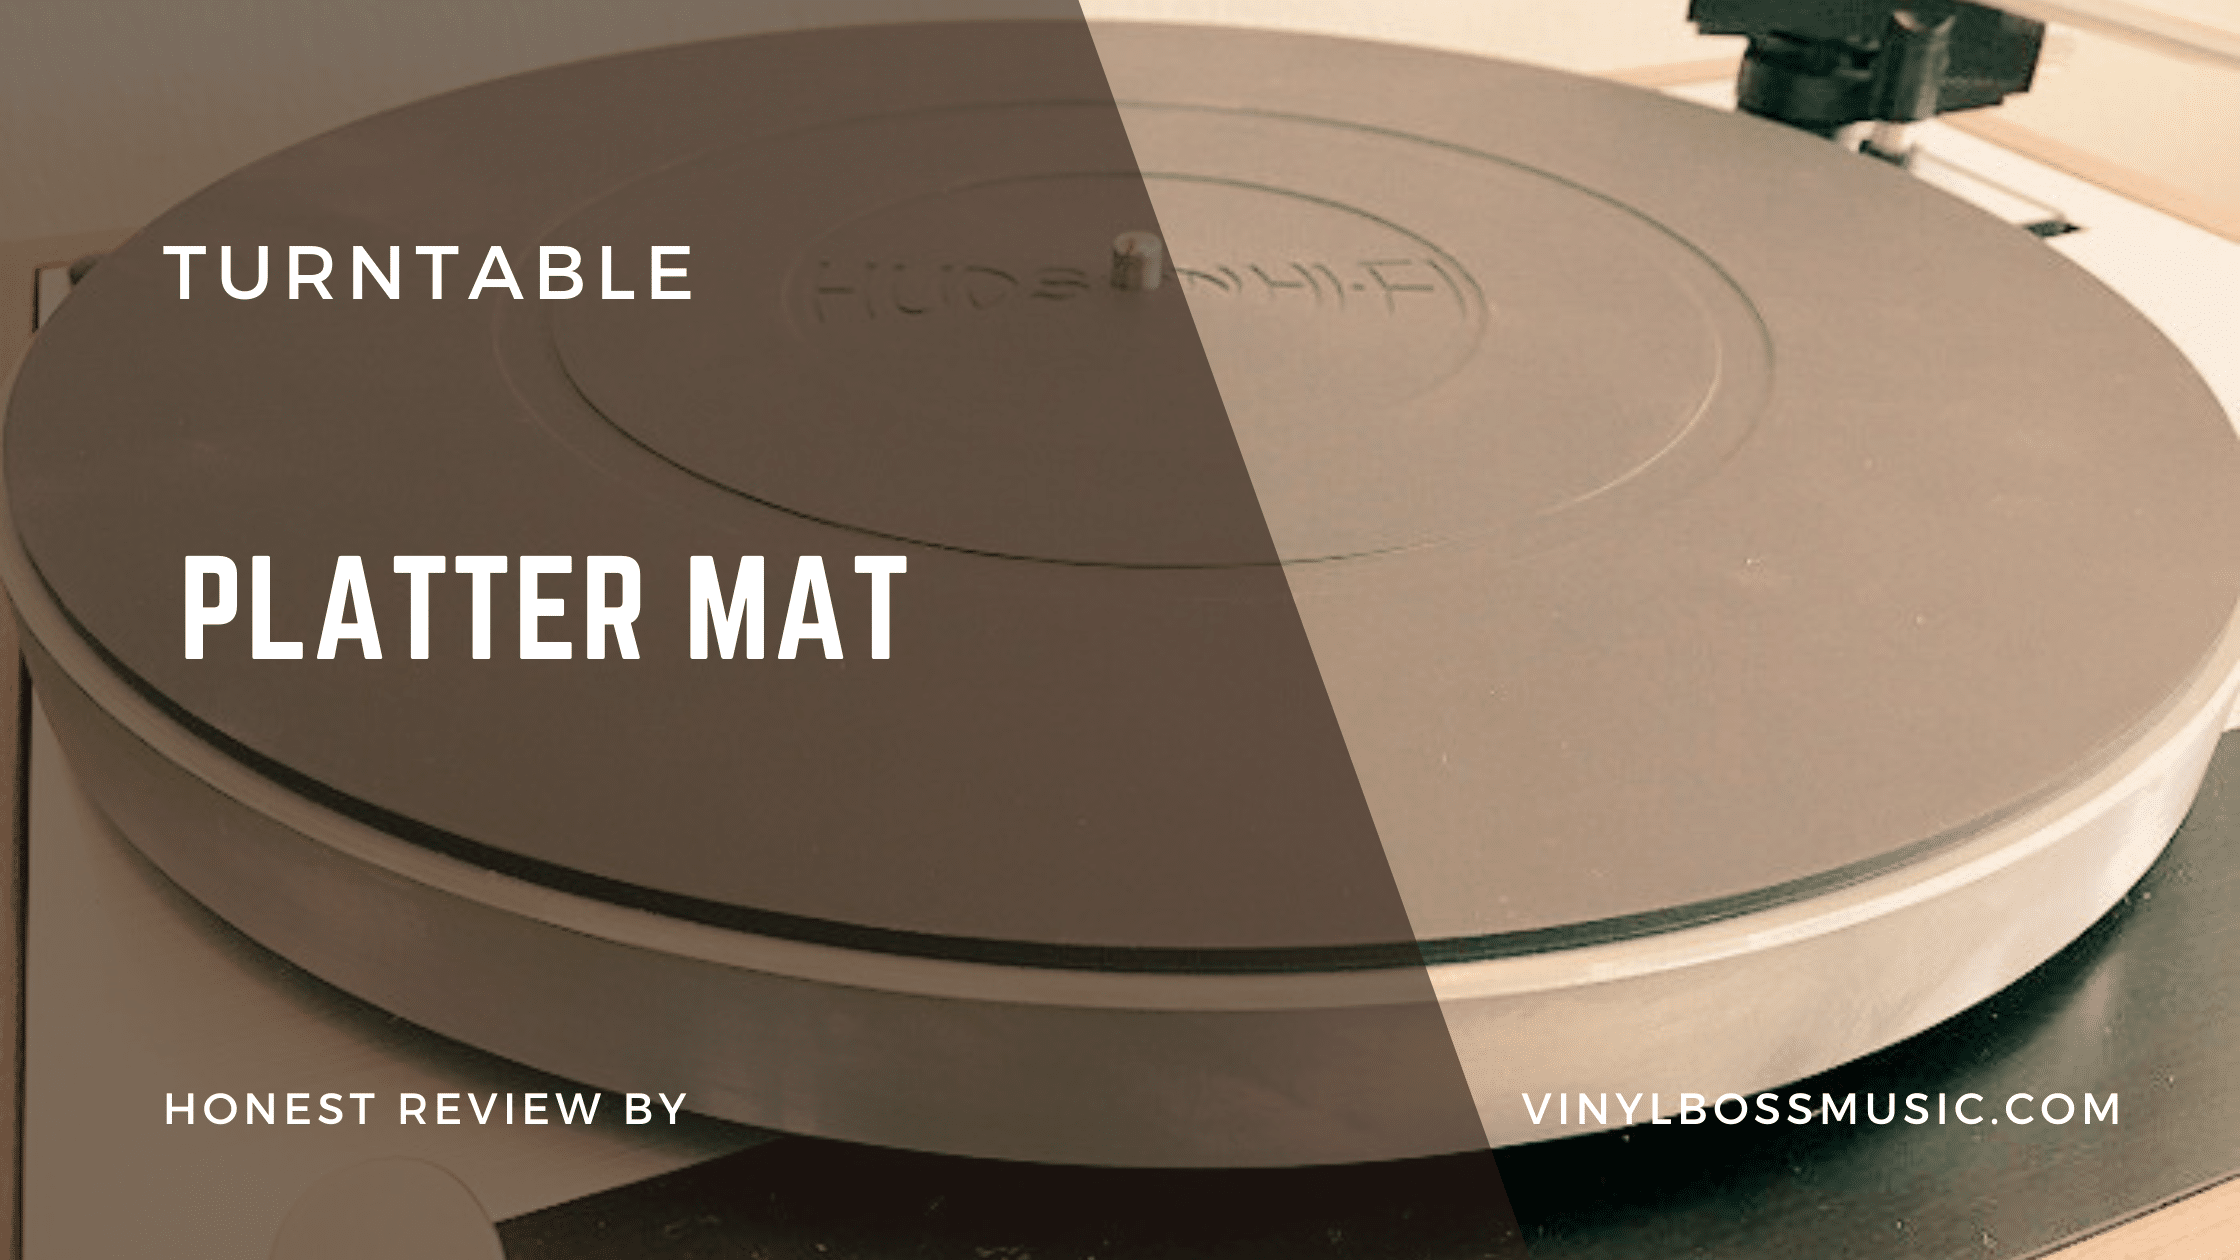 Platter Mats: What Options Are Available, and Which Type Should You Choose?